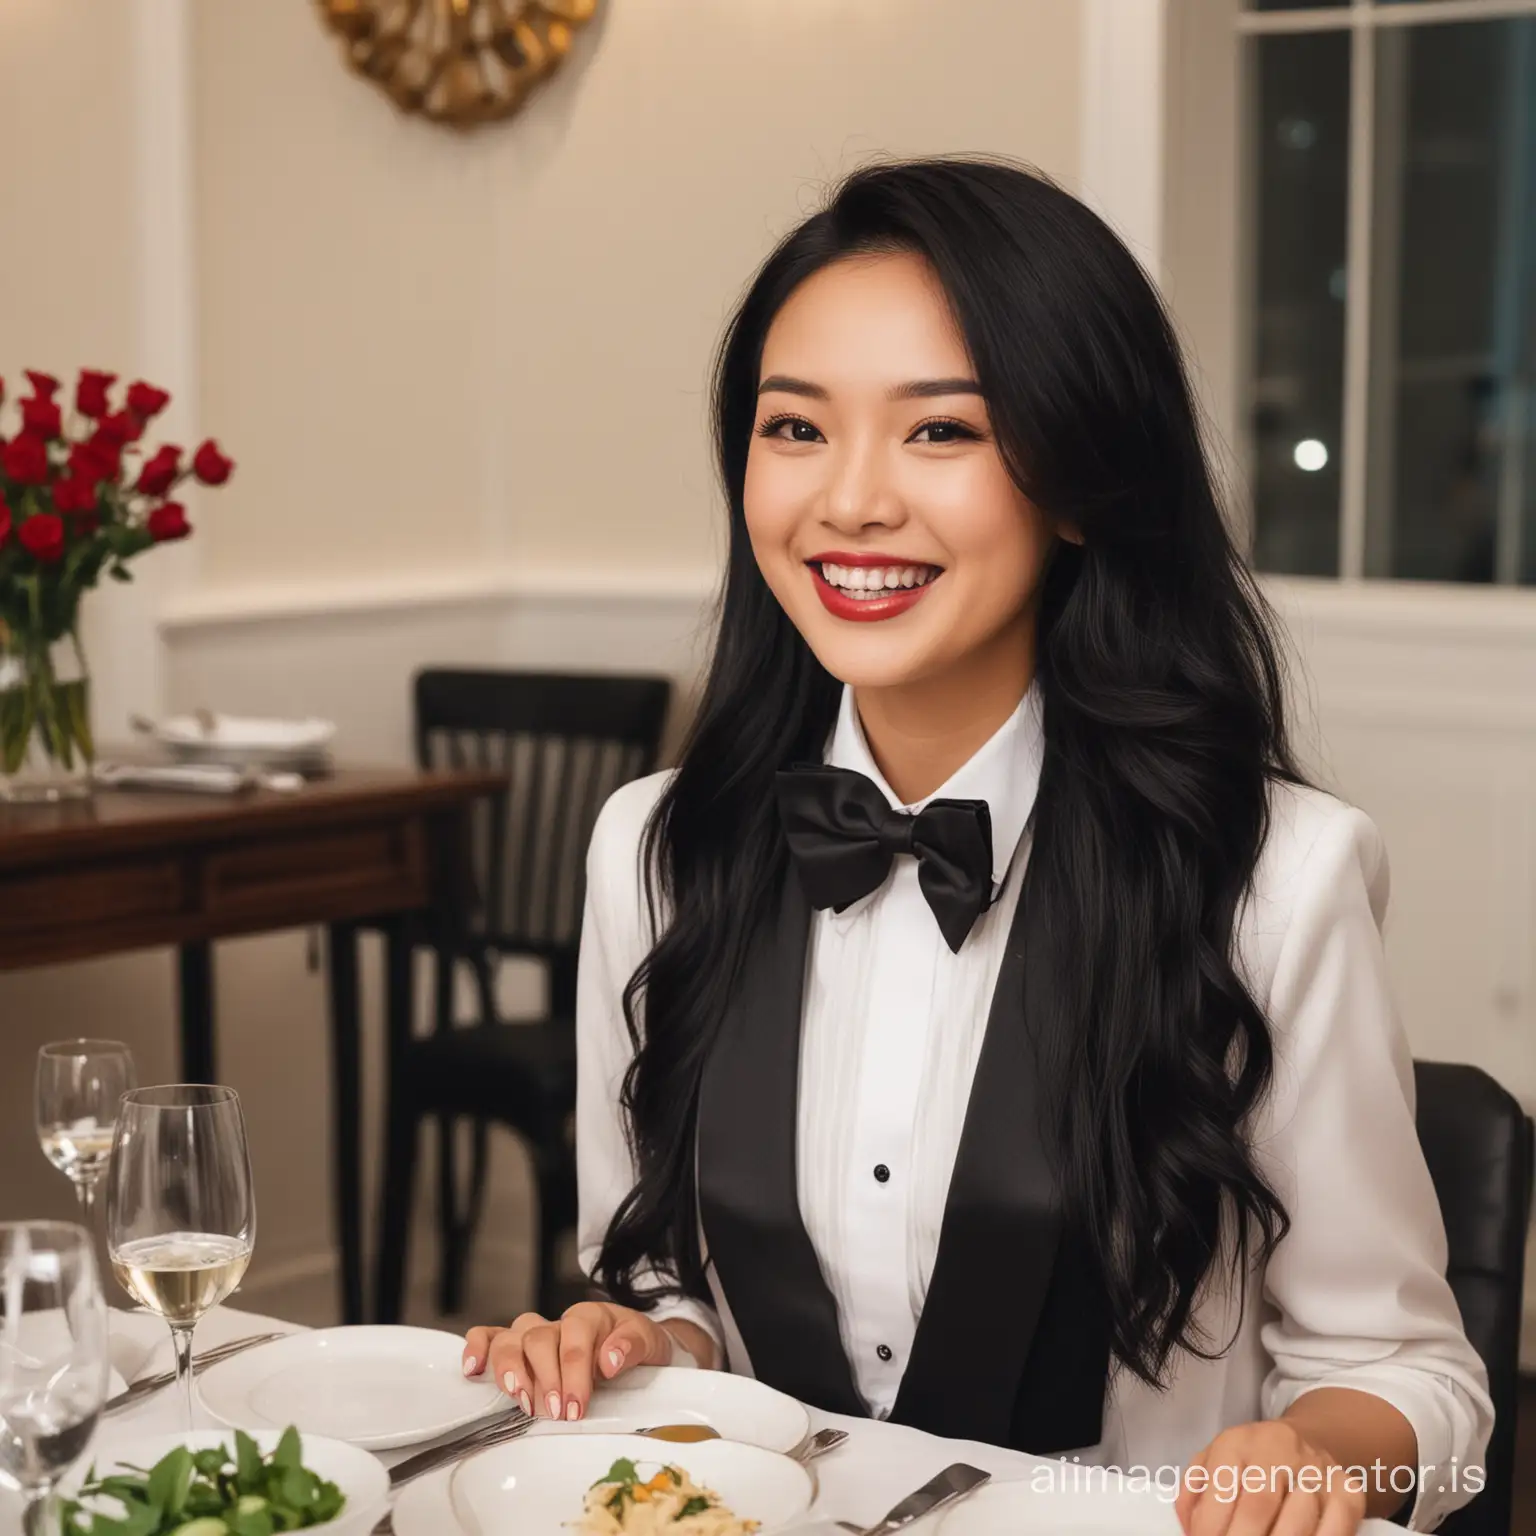 25 year old smiling and laughing Vietnamese lady with long black hair and lipstick wearing a tuxedo with a black bow tie and cufflinks. She is at a dinner table.